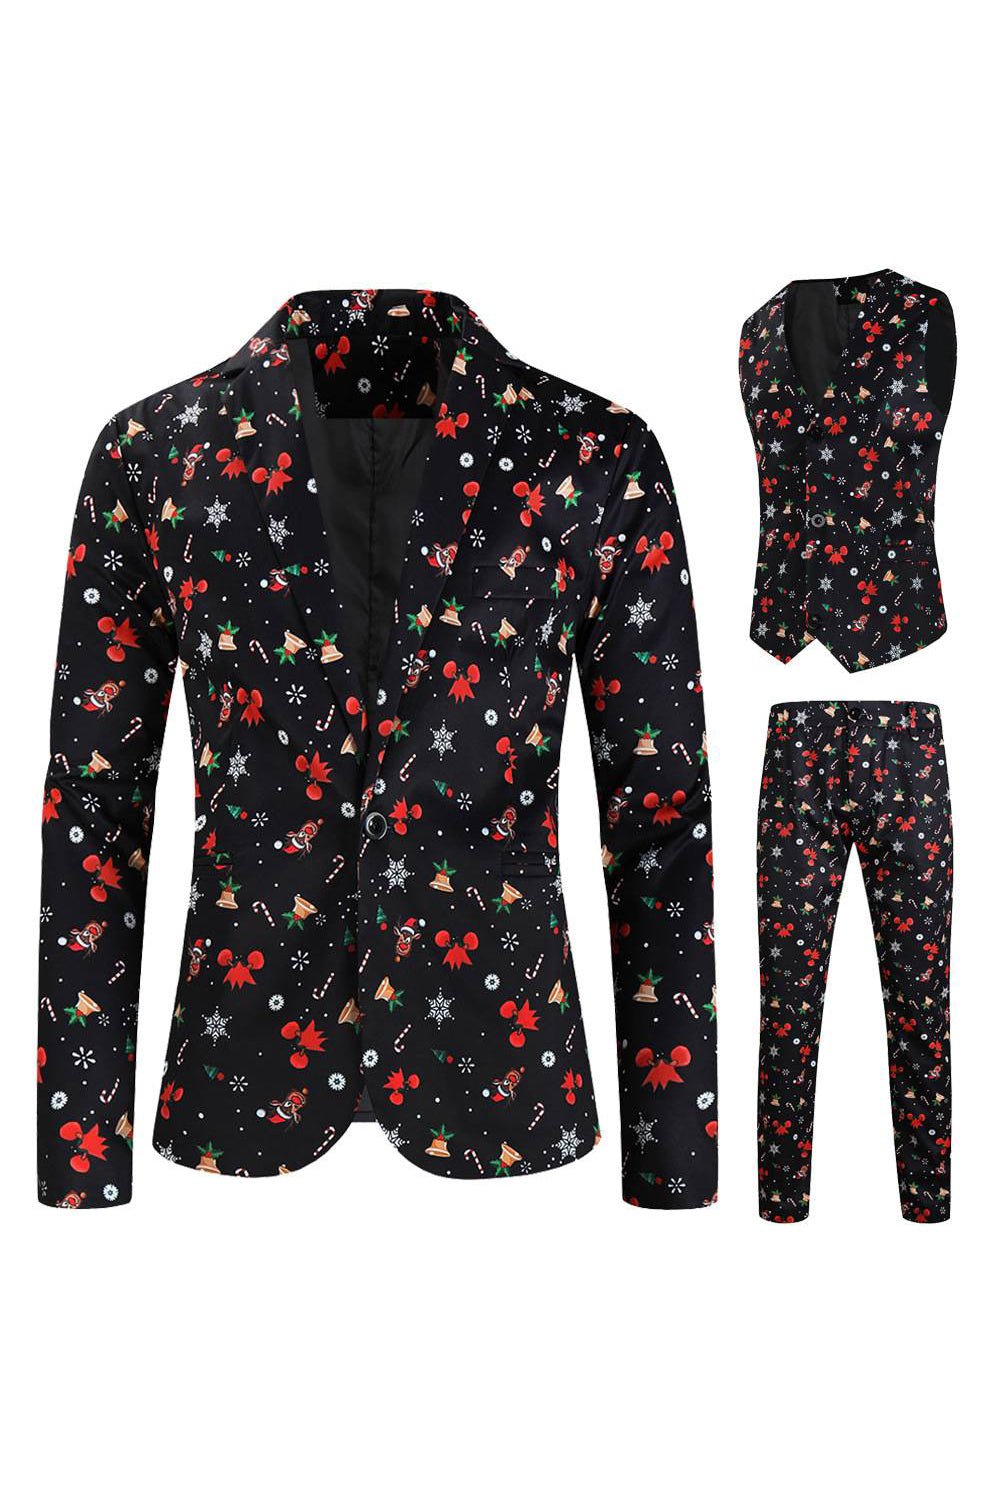 Men's Black Christmas Printed 3-Piece One Button Party Suits